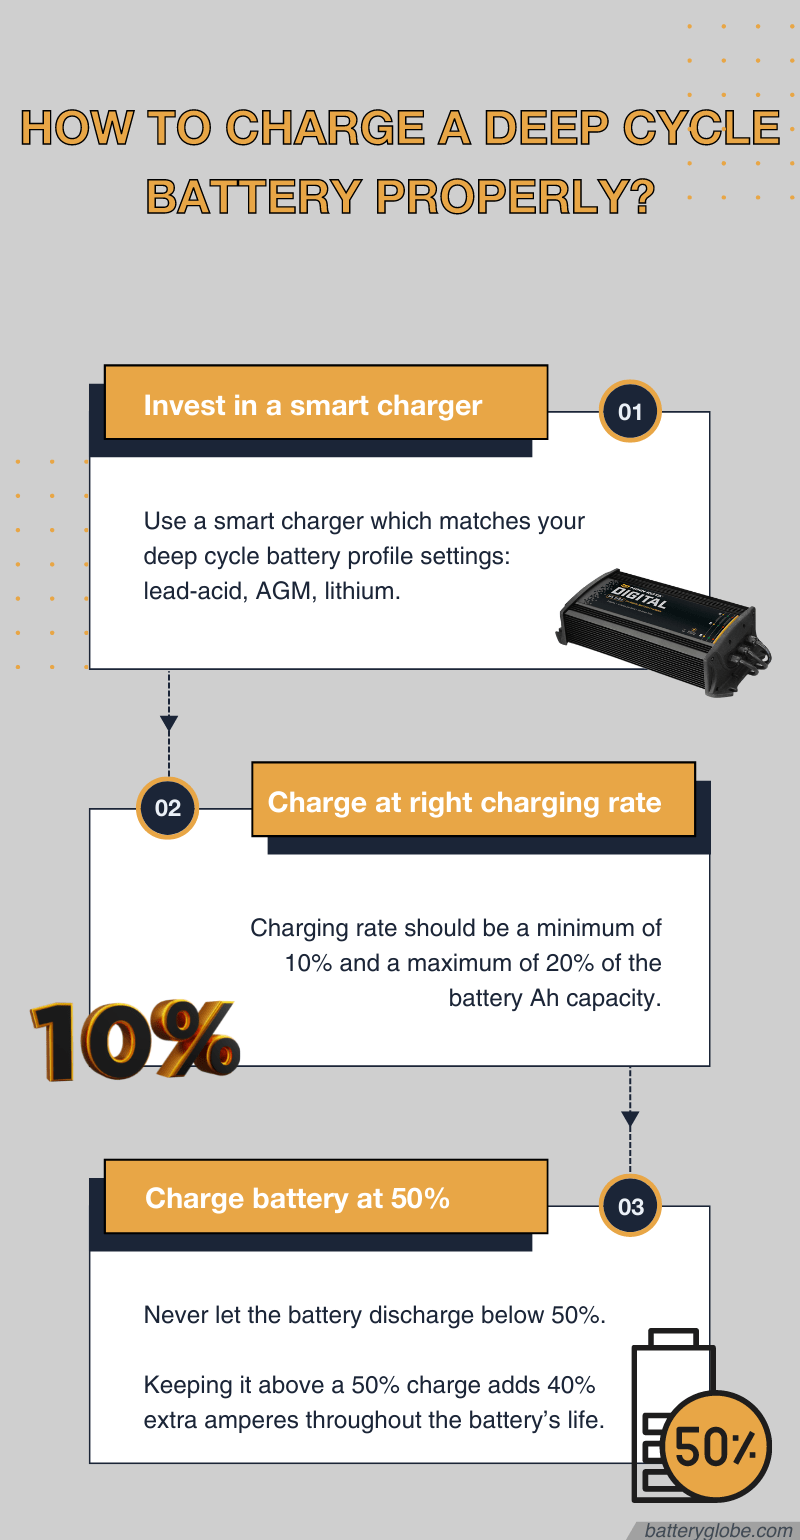 3 factors to consider when charging a deep cycle battery: type of charger, charging rate, and state of charge.